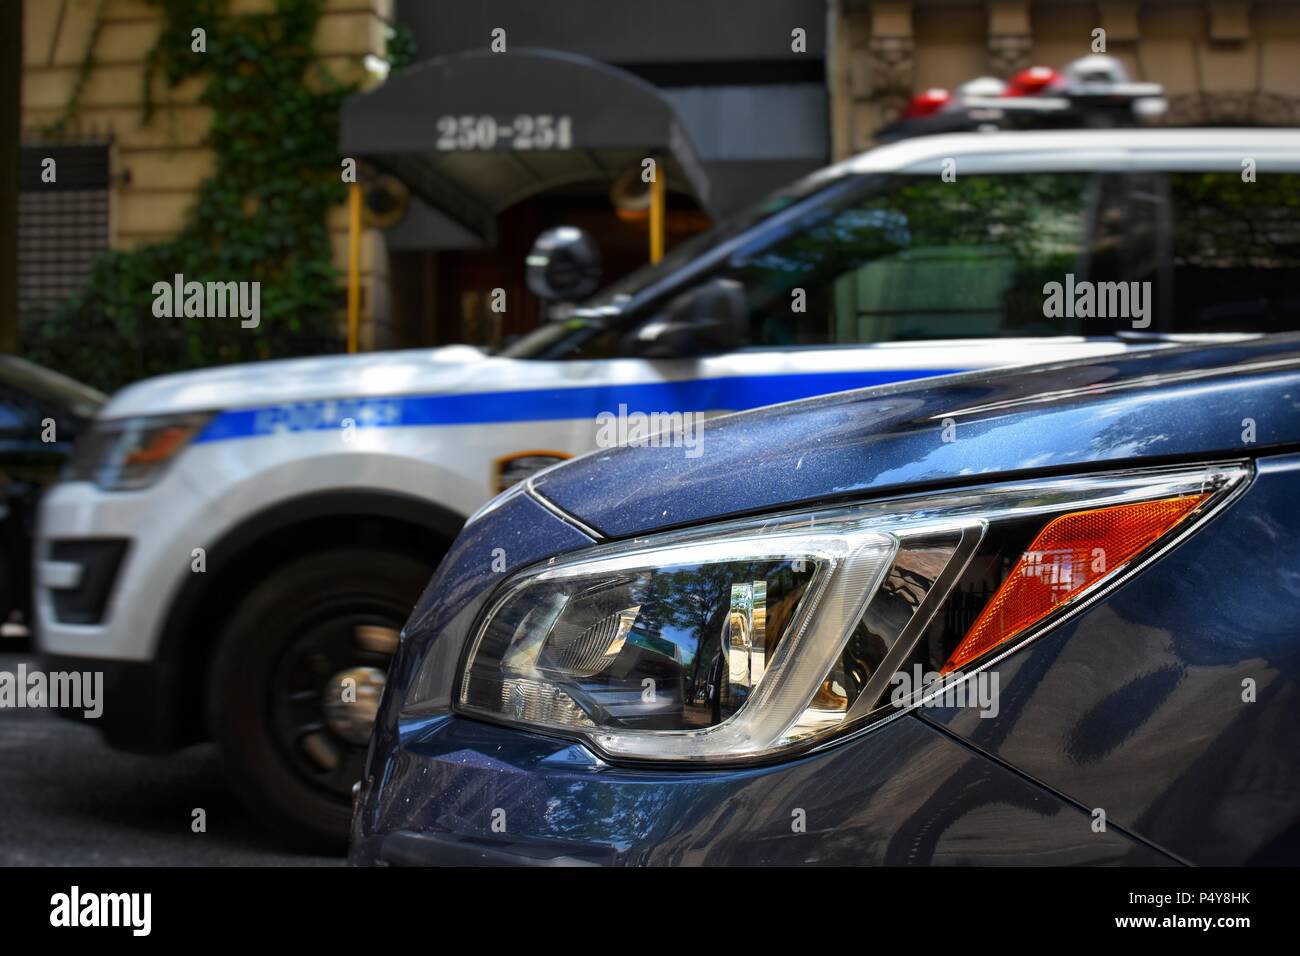 Subaru Outback overtaken by a police car, focus on the Subaru Outback headlight Stock Photo